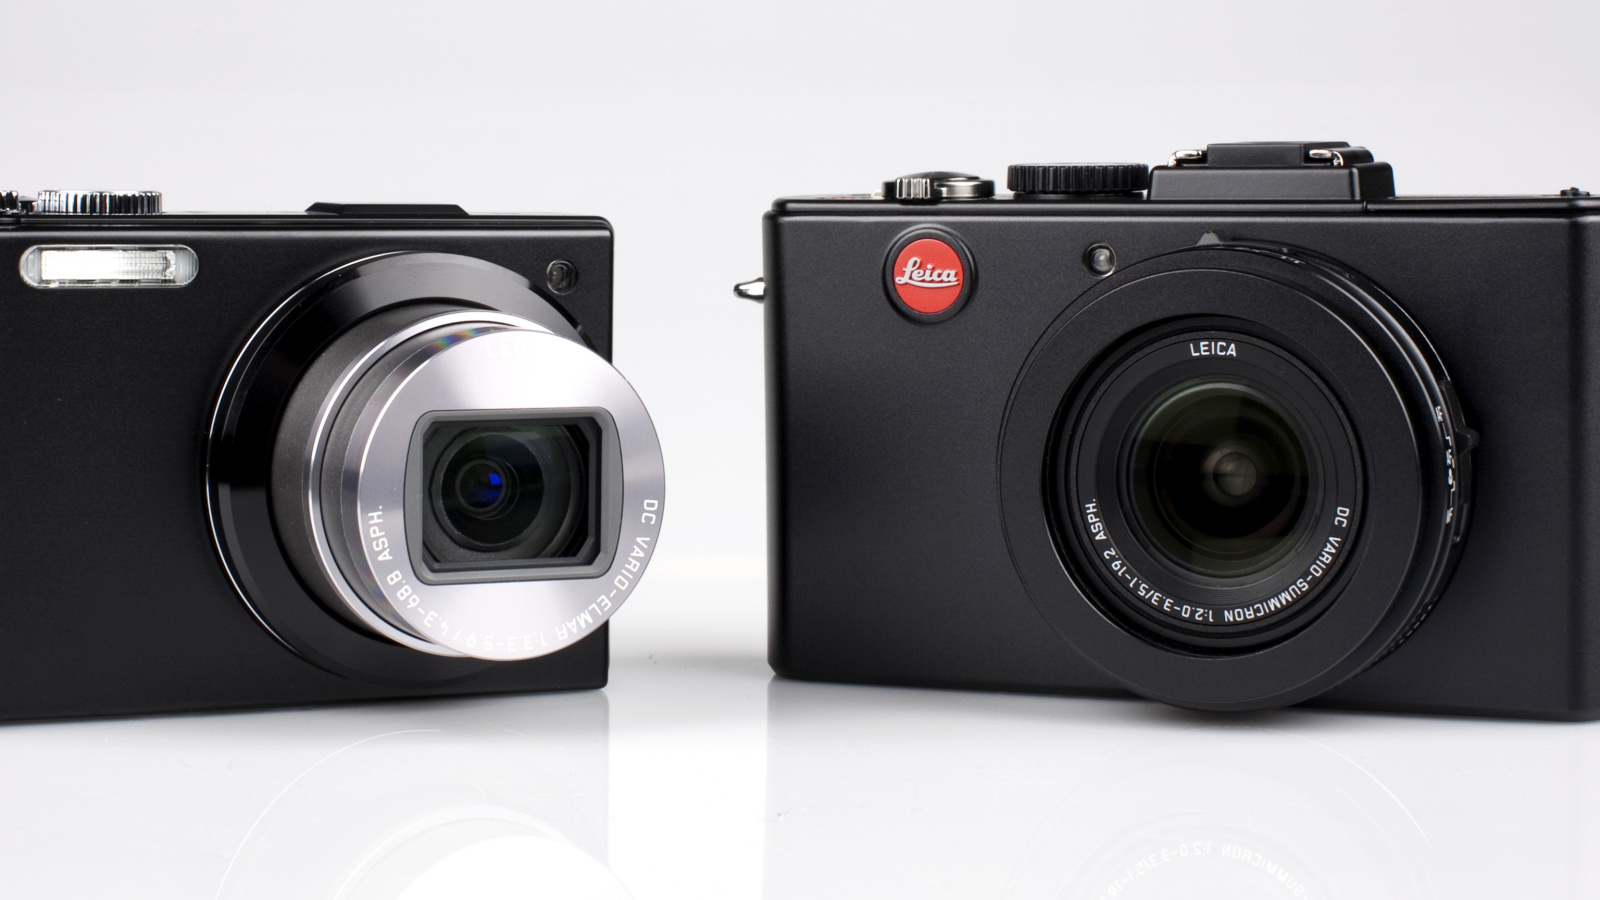 Leica D Lux 5 and Leica V LUX 1 wallpaper 1600x900